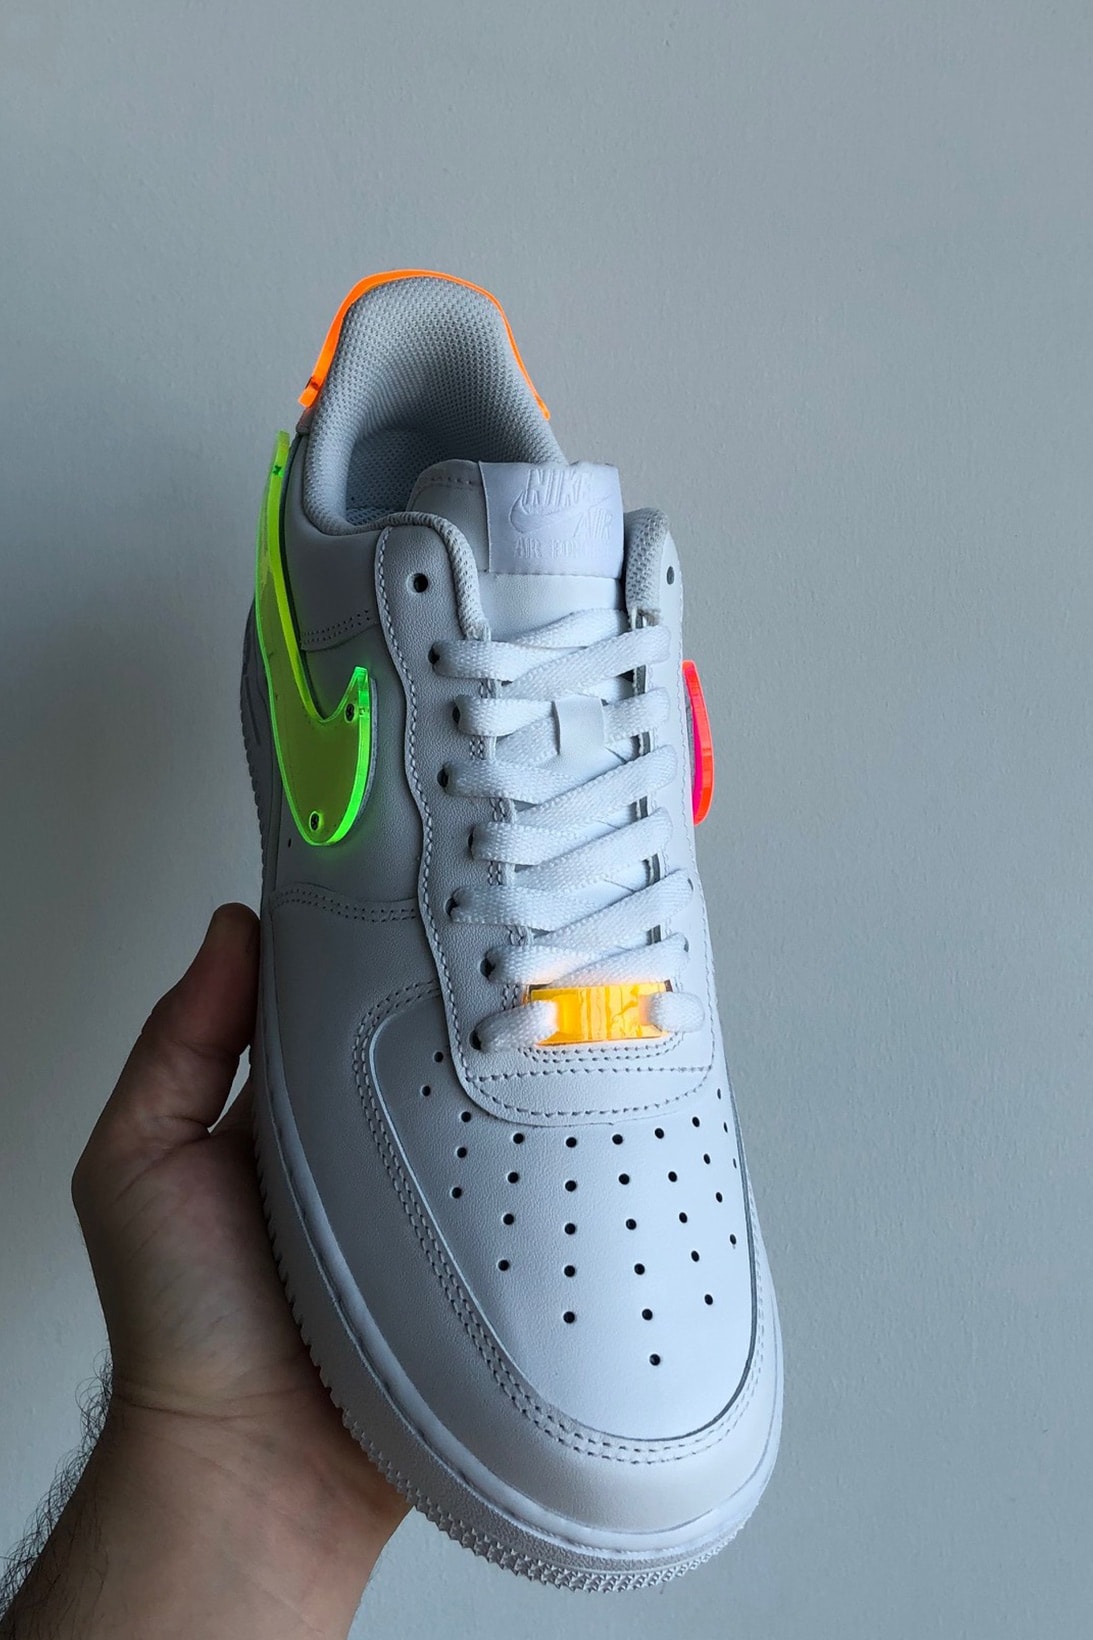 nike air force 1 af1 thermoformed neon multi-color acrylic tbd in process release jennifer lopez sneakers 